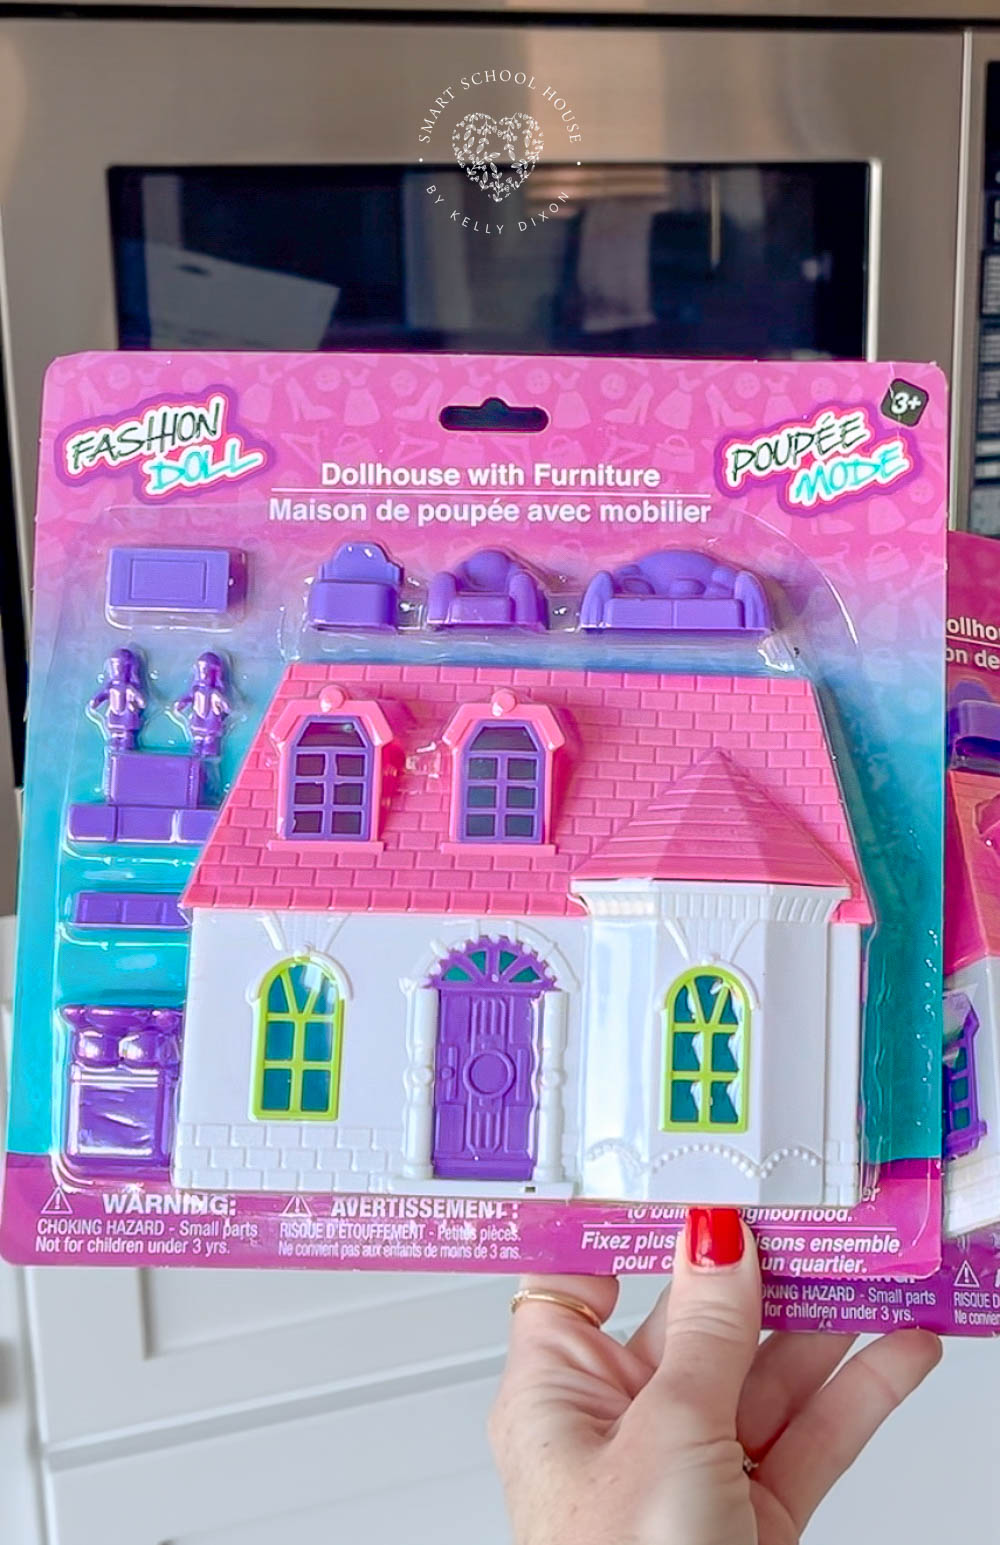 Plastic doll house from the dollar store